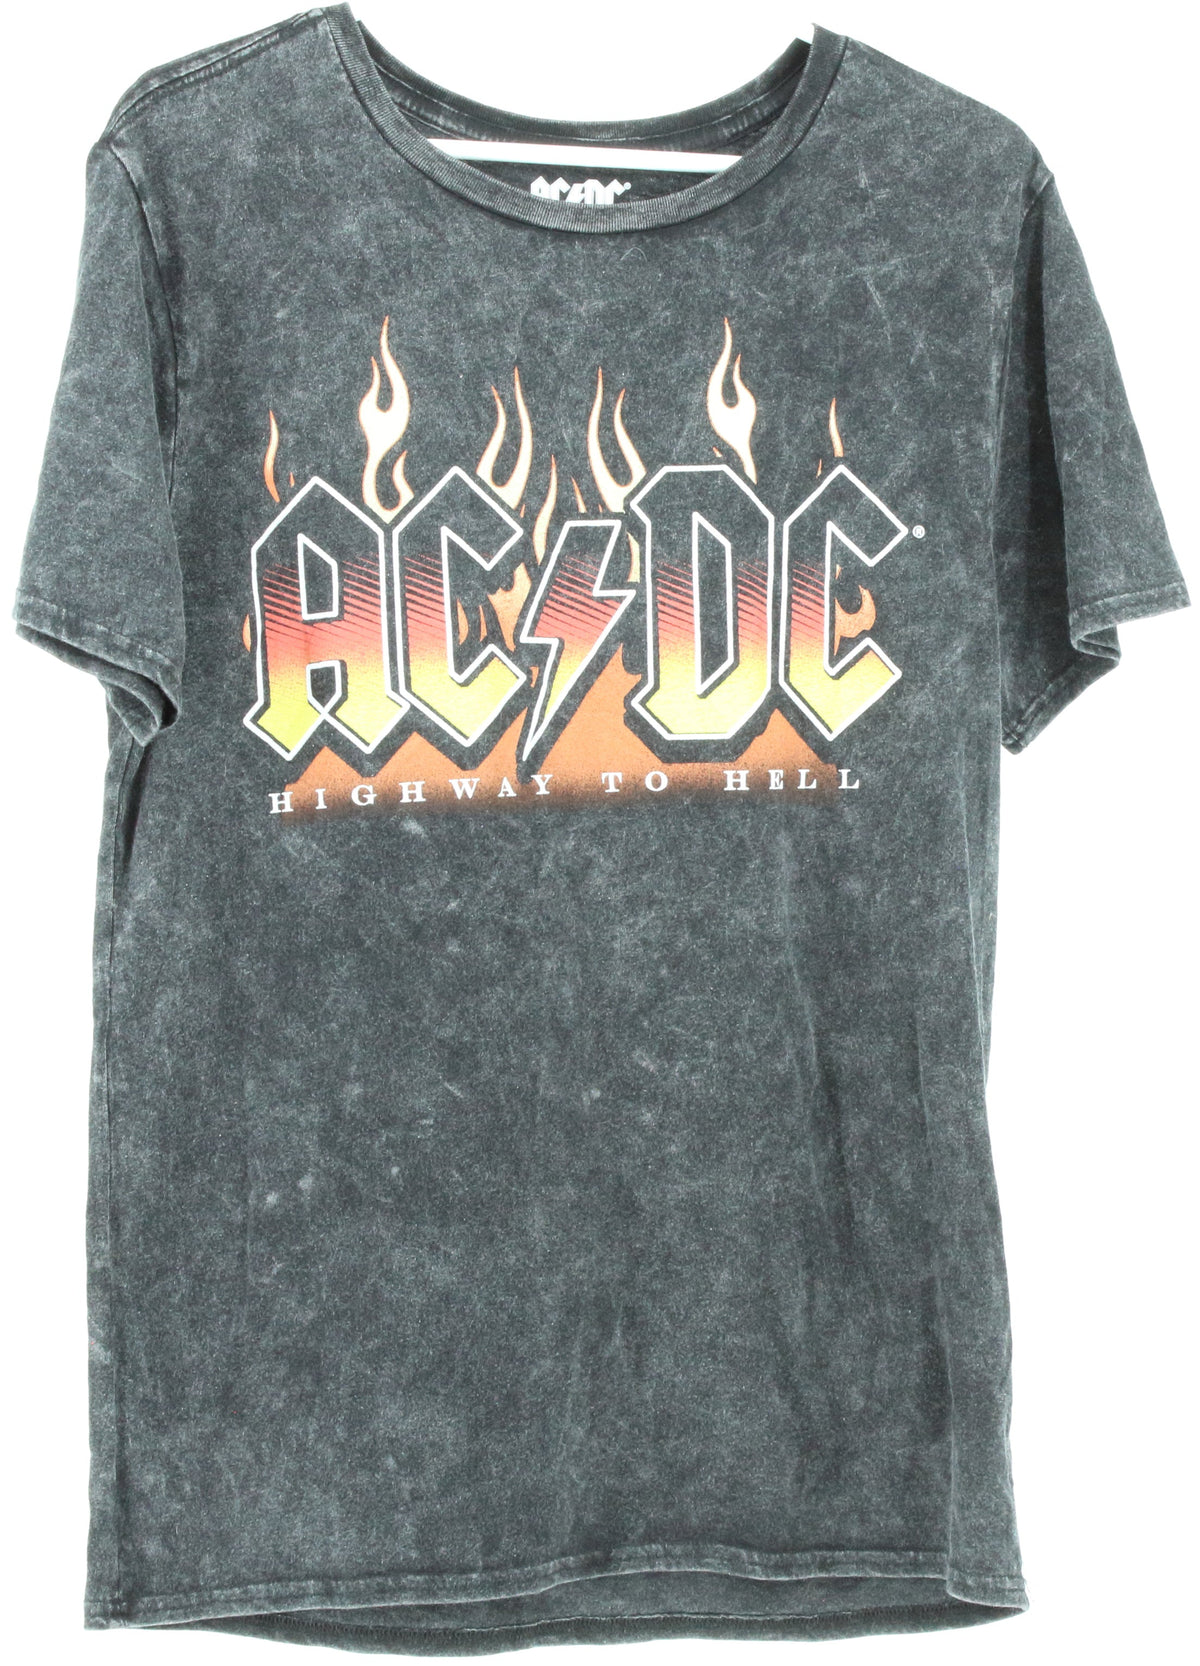 ACDC Highway to Hell North American Tour 1979 Black Marble Graphic Band Tee